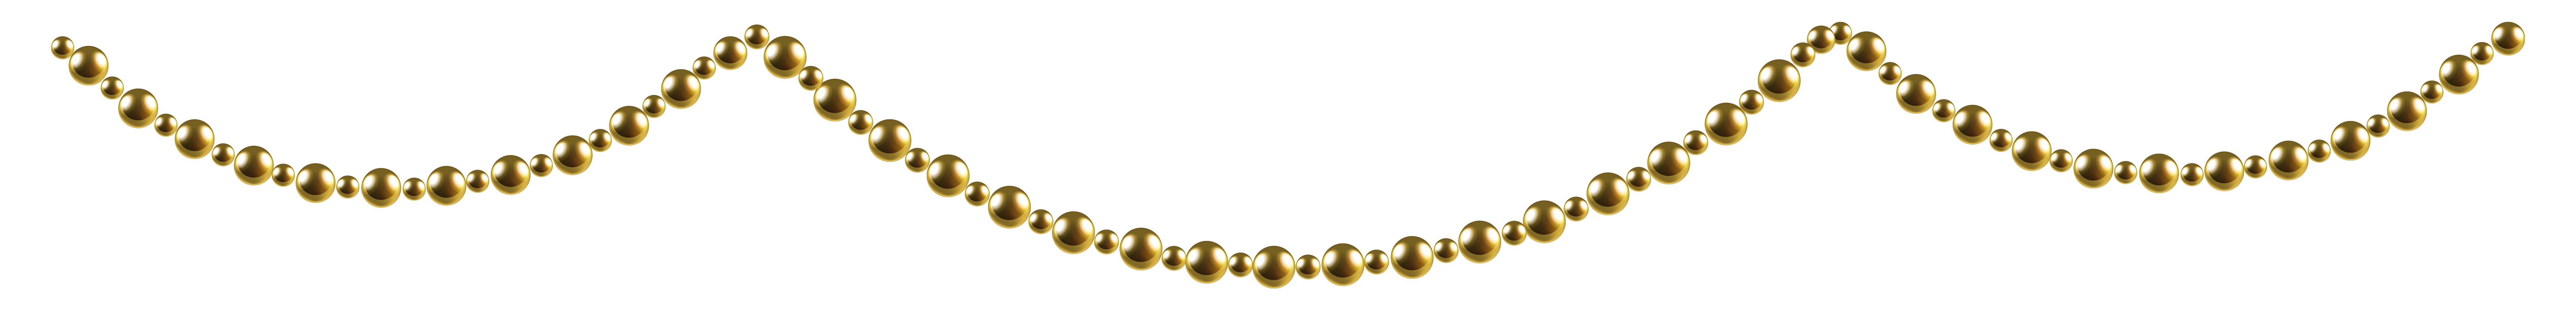 Gold Garland PNG Clip Art Image | Gallery Yopriceville - High-Quality